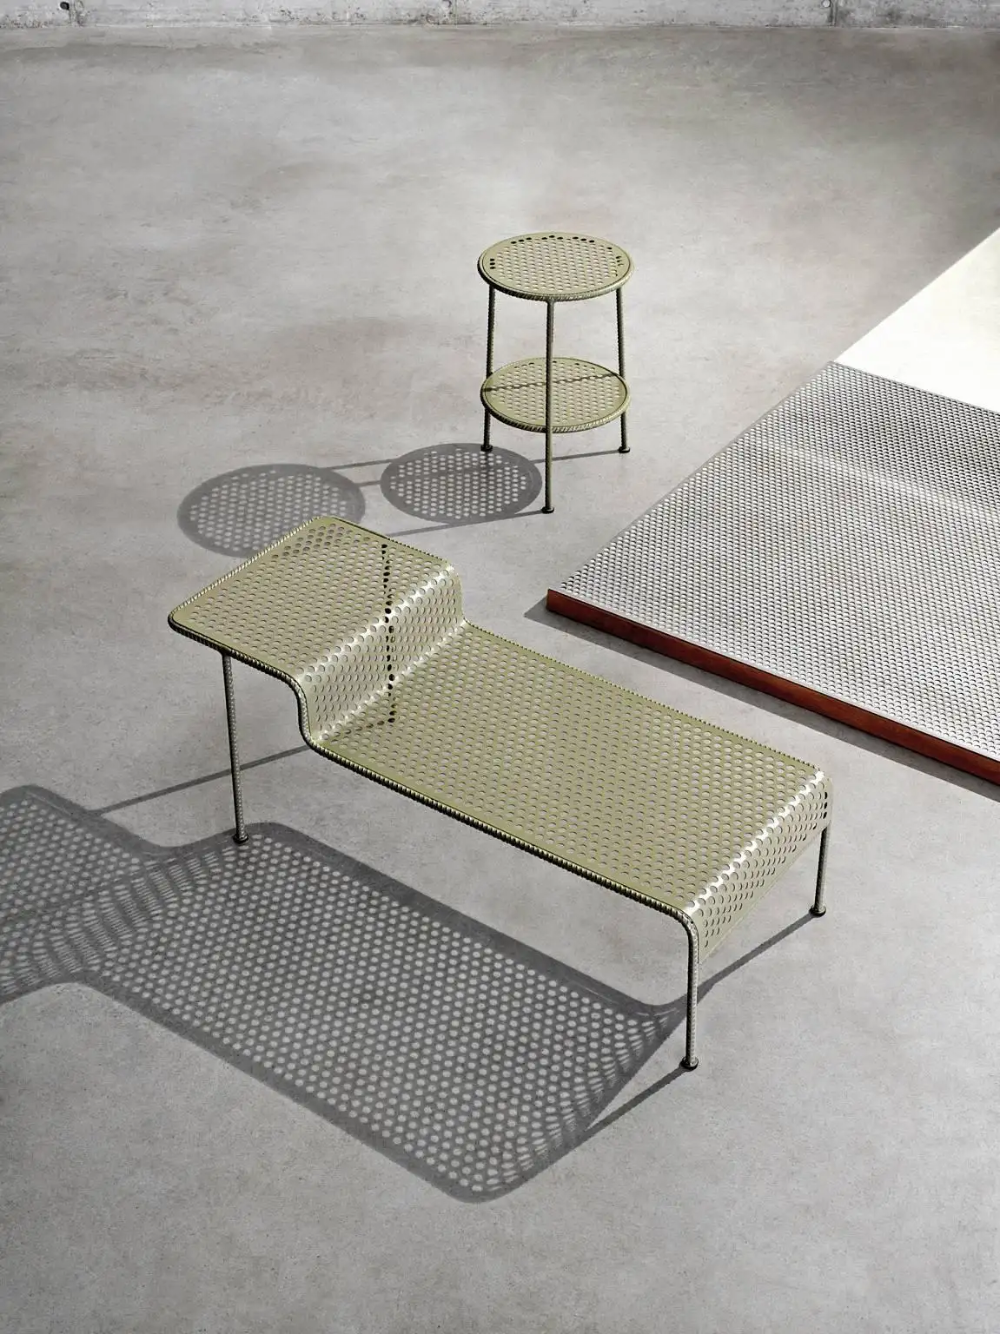 Buy a metal coffee table to relax for
  years while using it